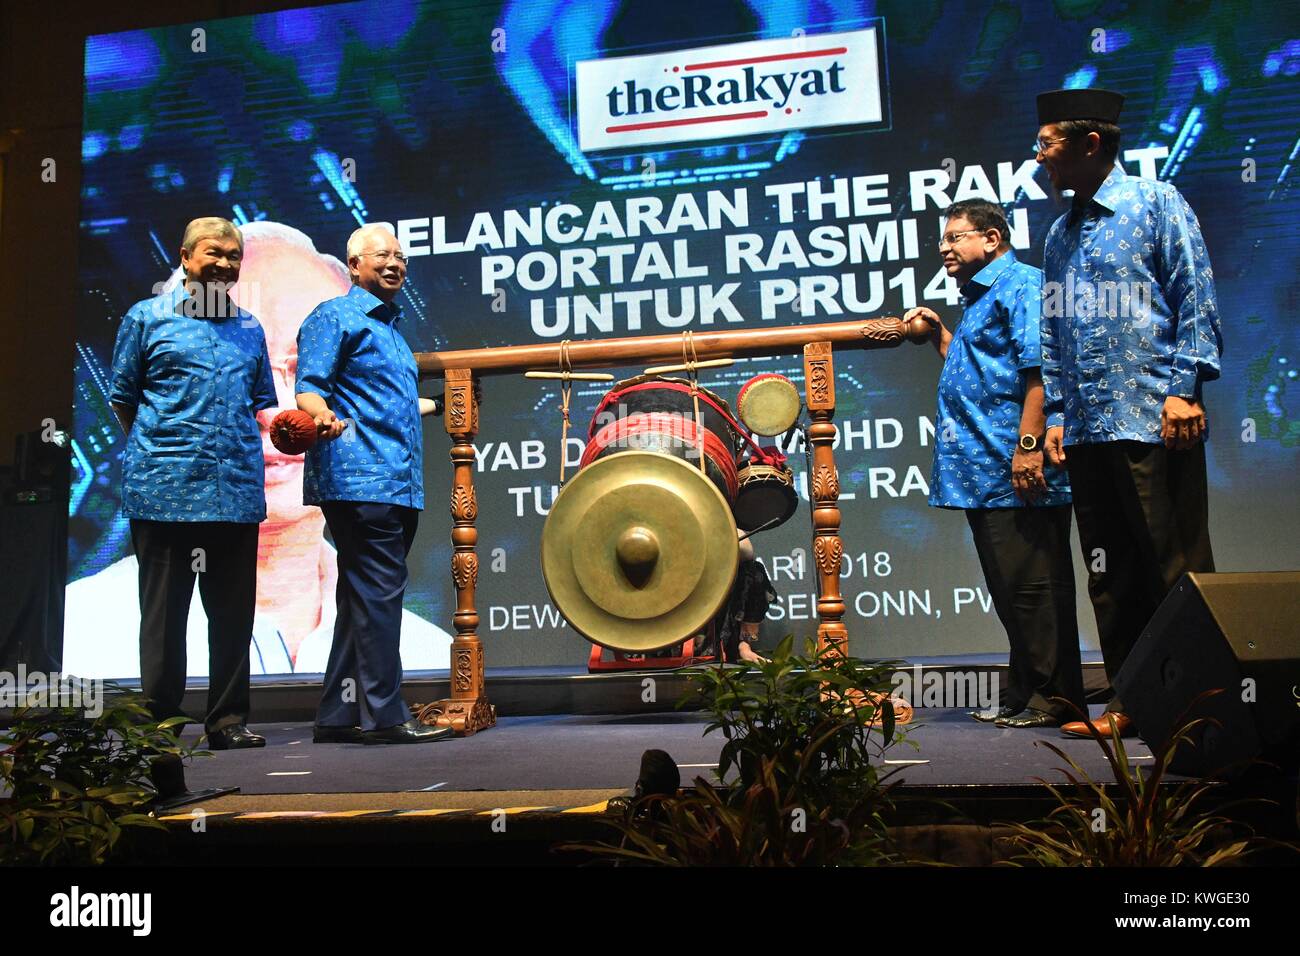 Kuala Lumpur, Malaysia. 3rd Jan, 2018. Malaysian Prime Minister Najib Razak (2nd L) attends the launching ceremony of the official campaign website for the ruling coalition Barisan Nasional in Kuala Lumpur, Malaysia, Jan. 3, 2018. Malaysian Prime Minister Najib Razak on Wednesday launched the official campaign website for his ruling coalition of Barisan Nasional, or National Front for the upcoming general elections due by the middle of the 2018. Credit: Chong Voon Chung/Xinhua/Alamy Live News Stock Photo